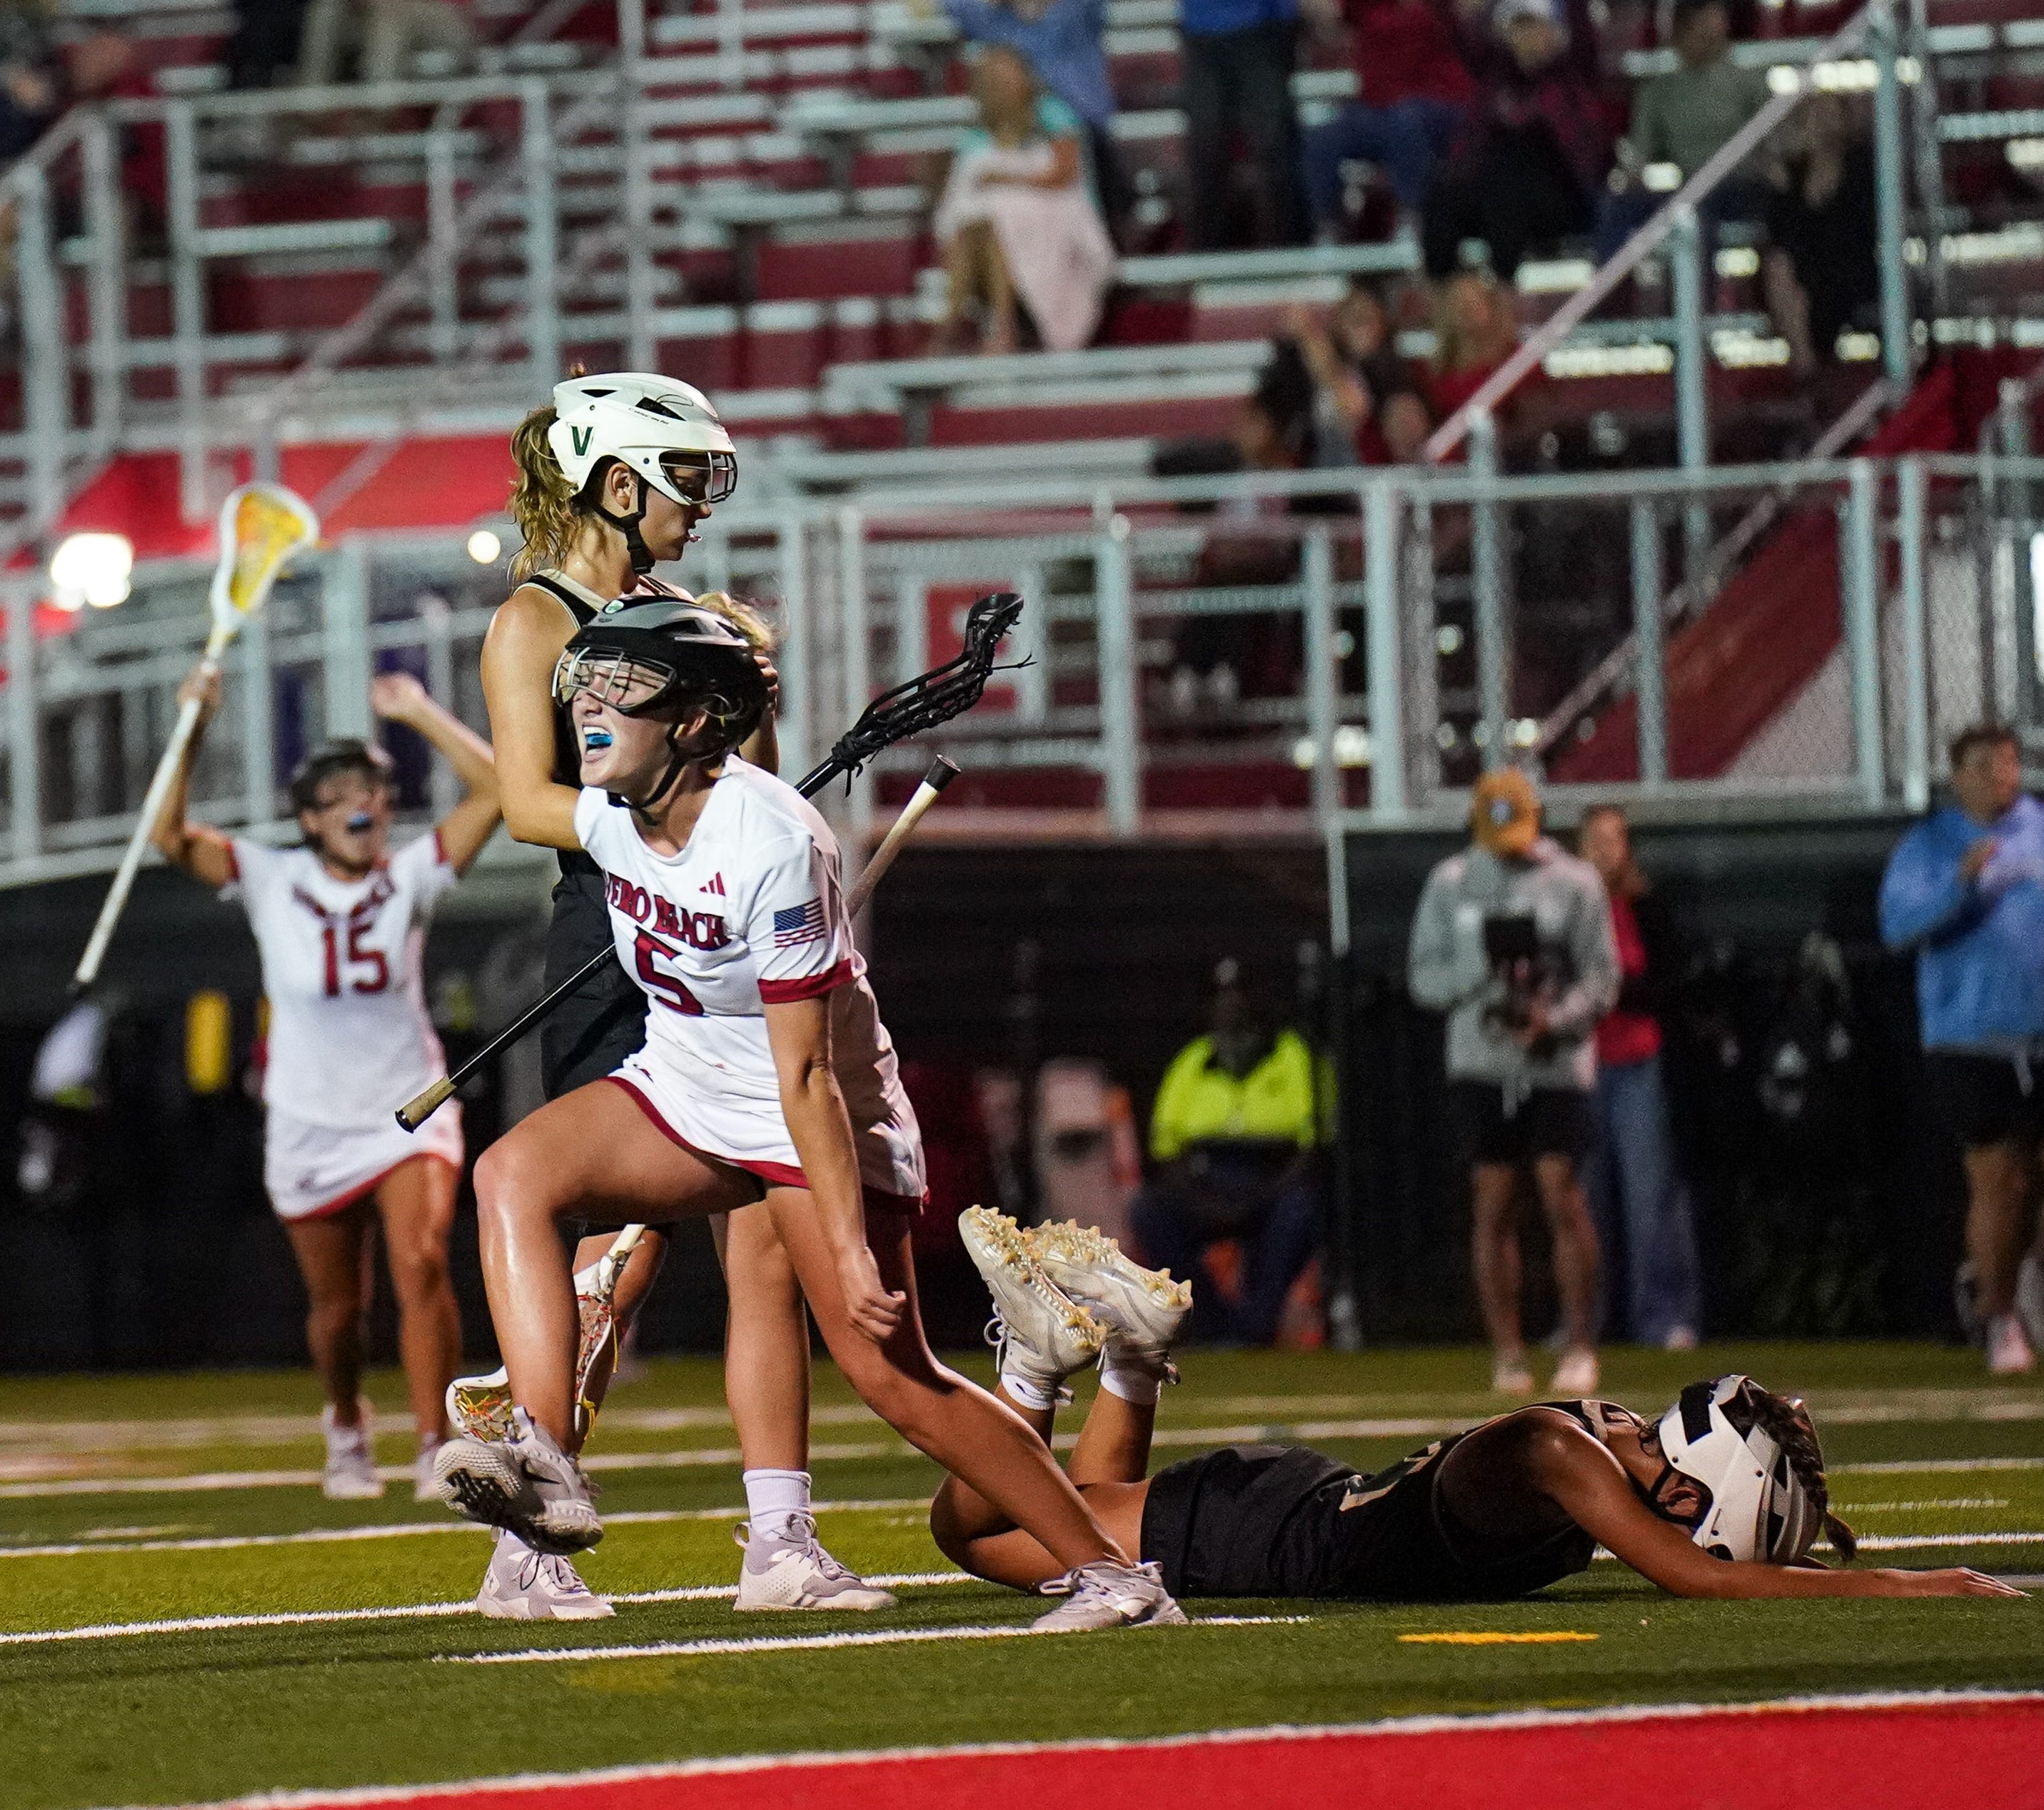 Girls State Lacrosse: Vero Beach's journey to break a nine-year title drought begins Friday